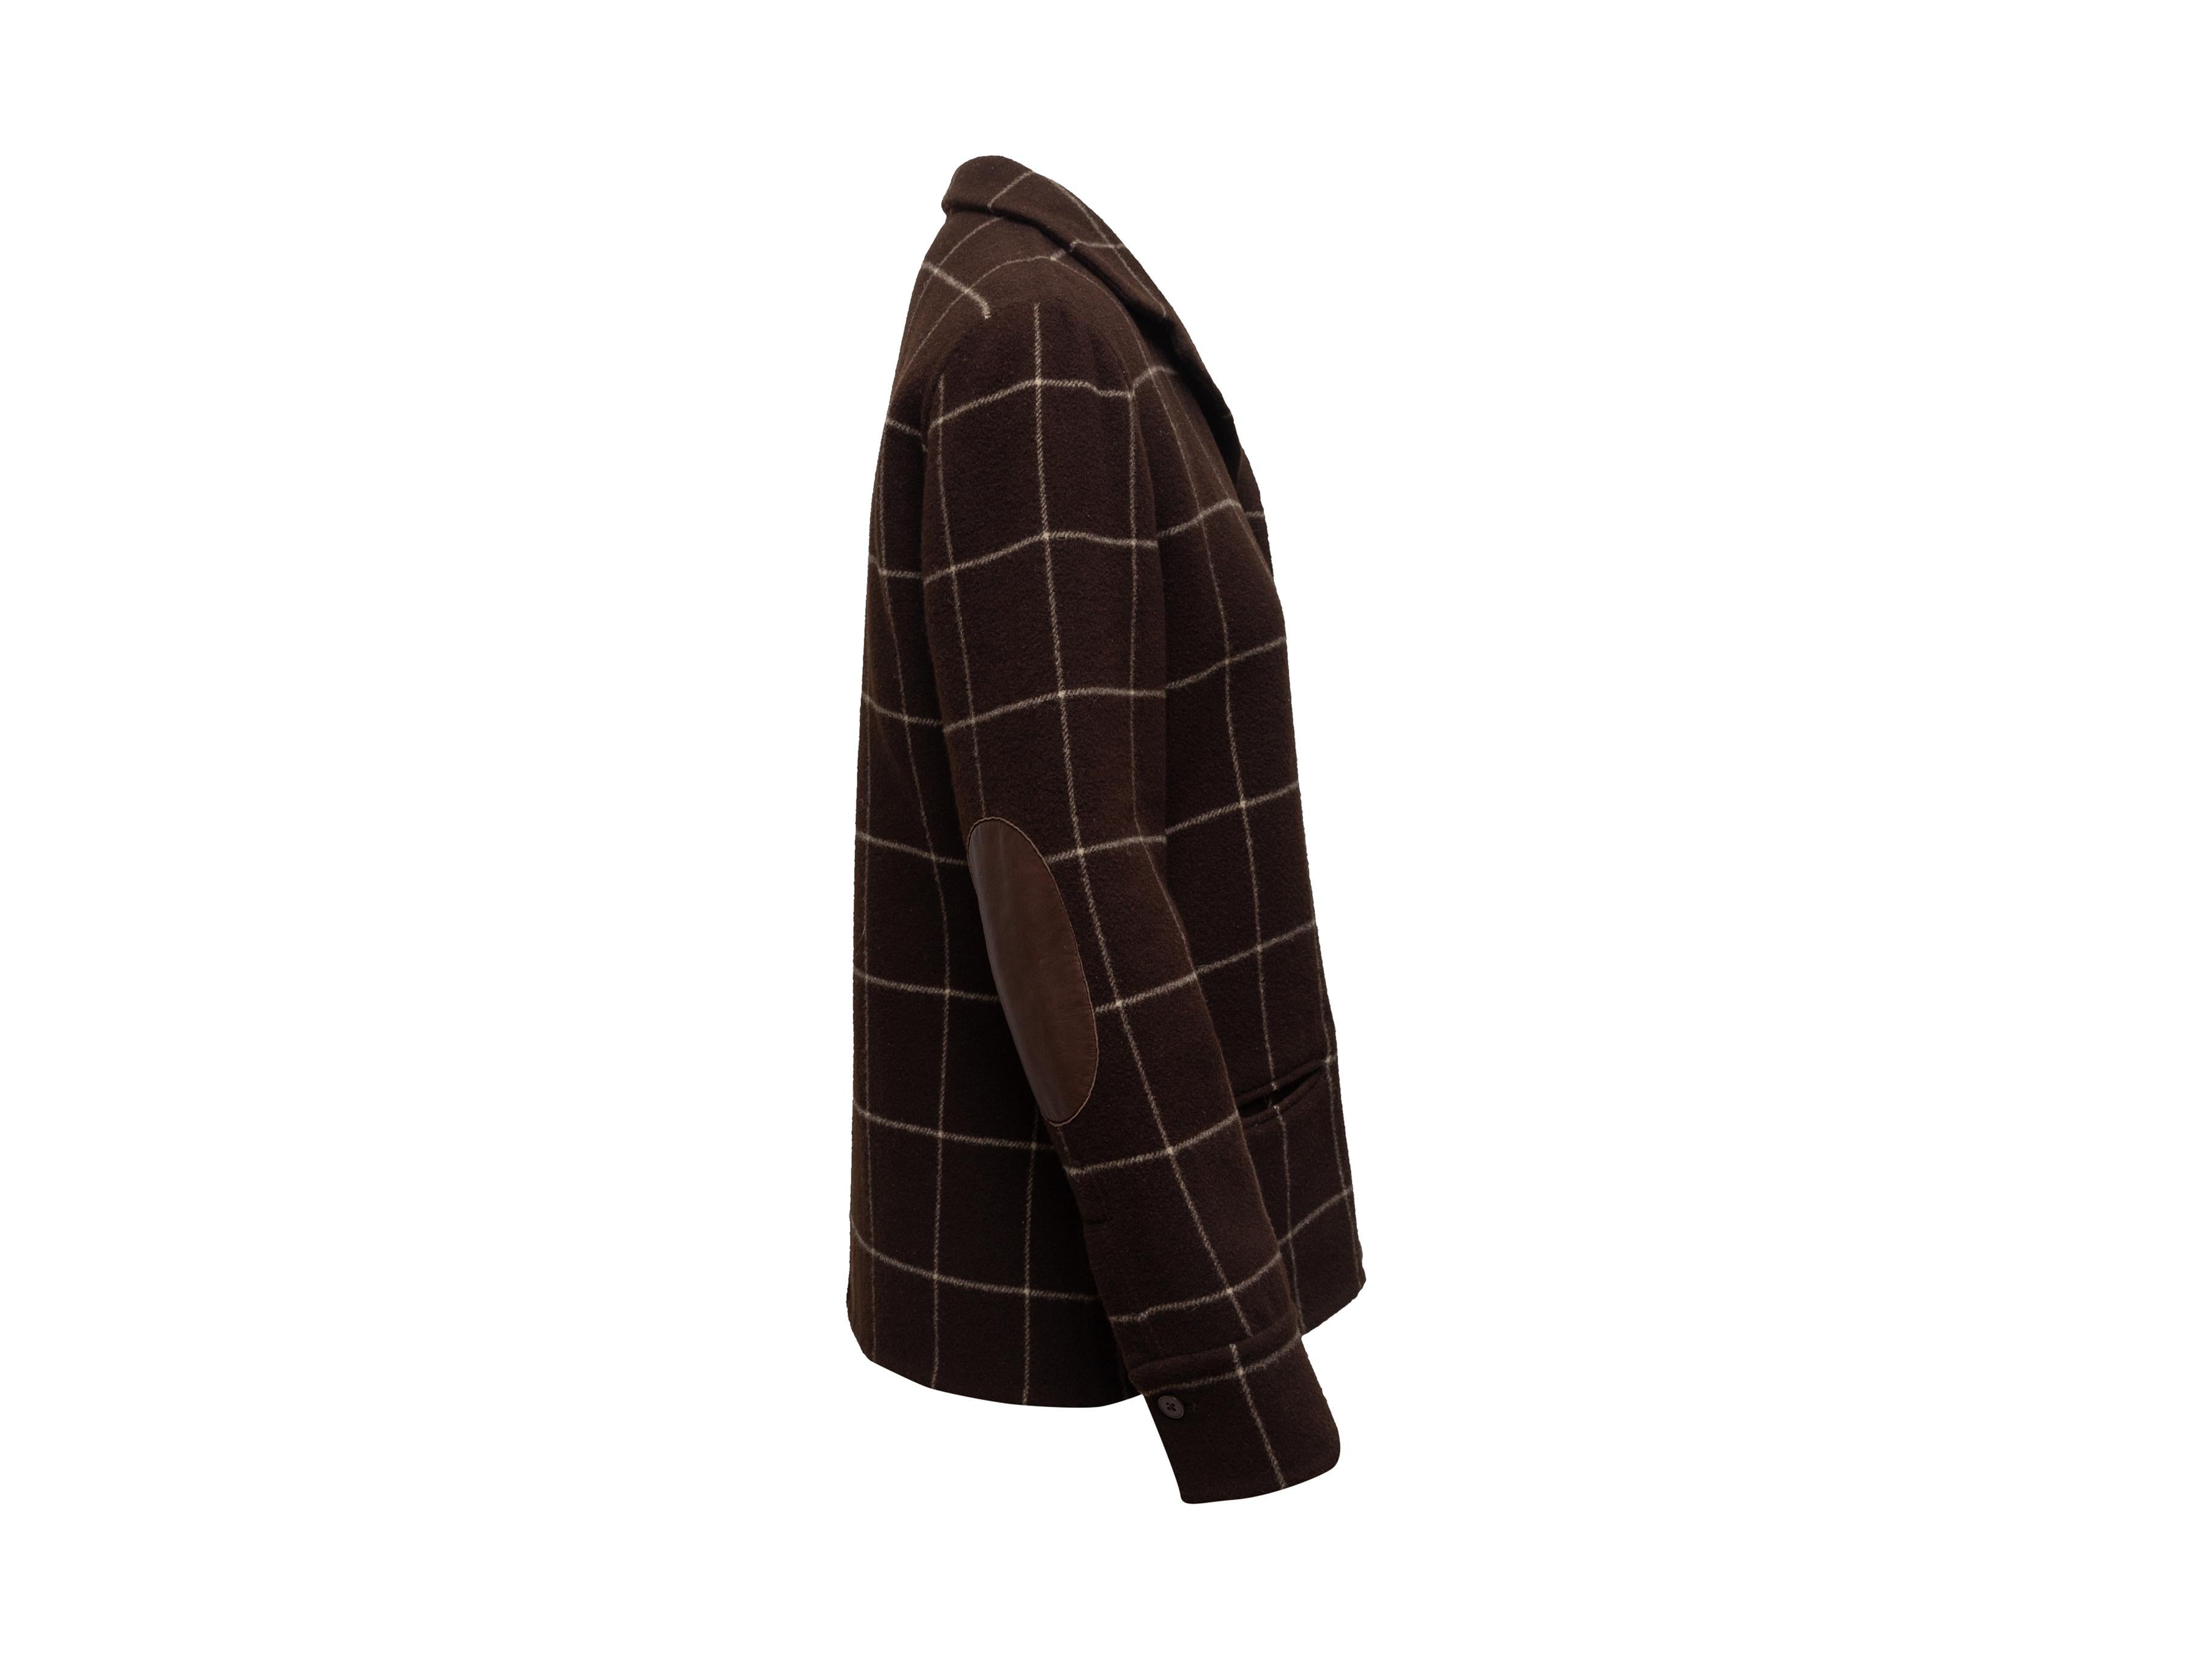 Product details: Brown and white wool grid patten jacket by Ralph Lauren Collection. Leather trim. Pointed collar. Dual welt pockets at hips. Button closures at front. 20